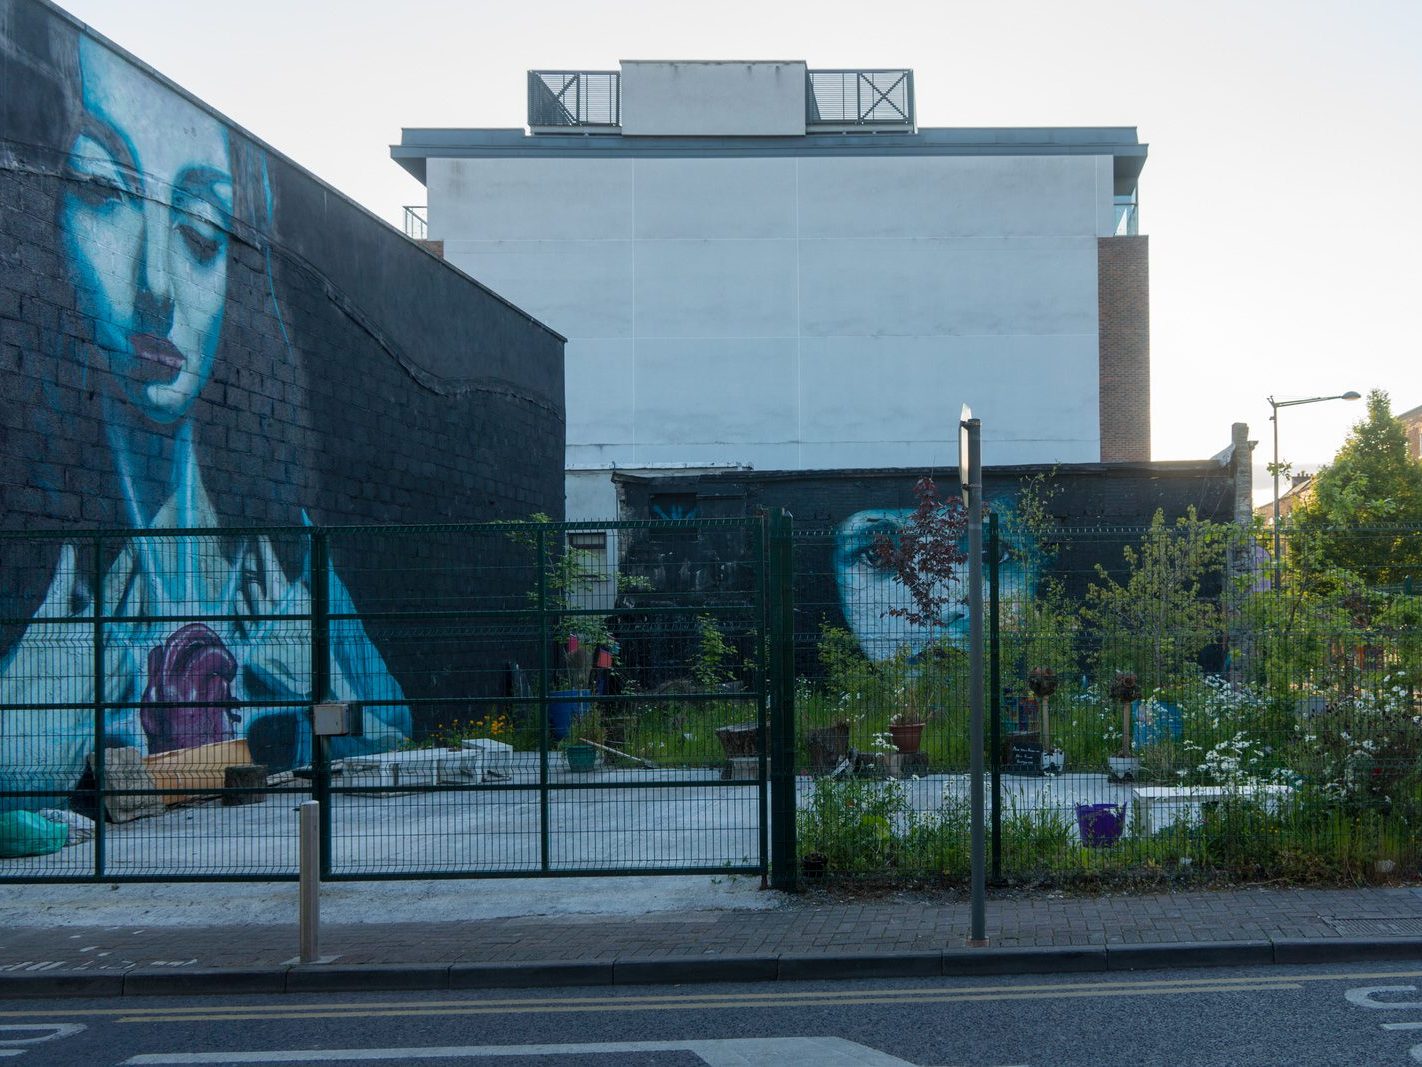 URBAN EXPRESSION IN LIMERICK 2015 [THE PRE NEW-NORMAL YEARS]-197291-1